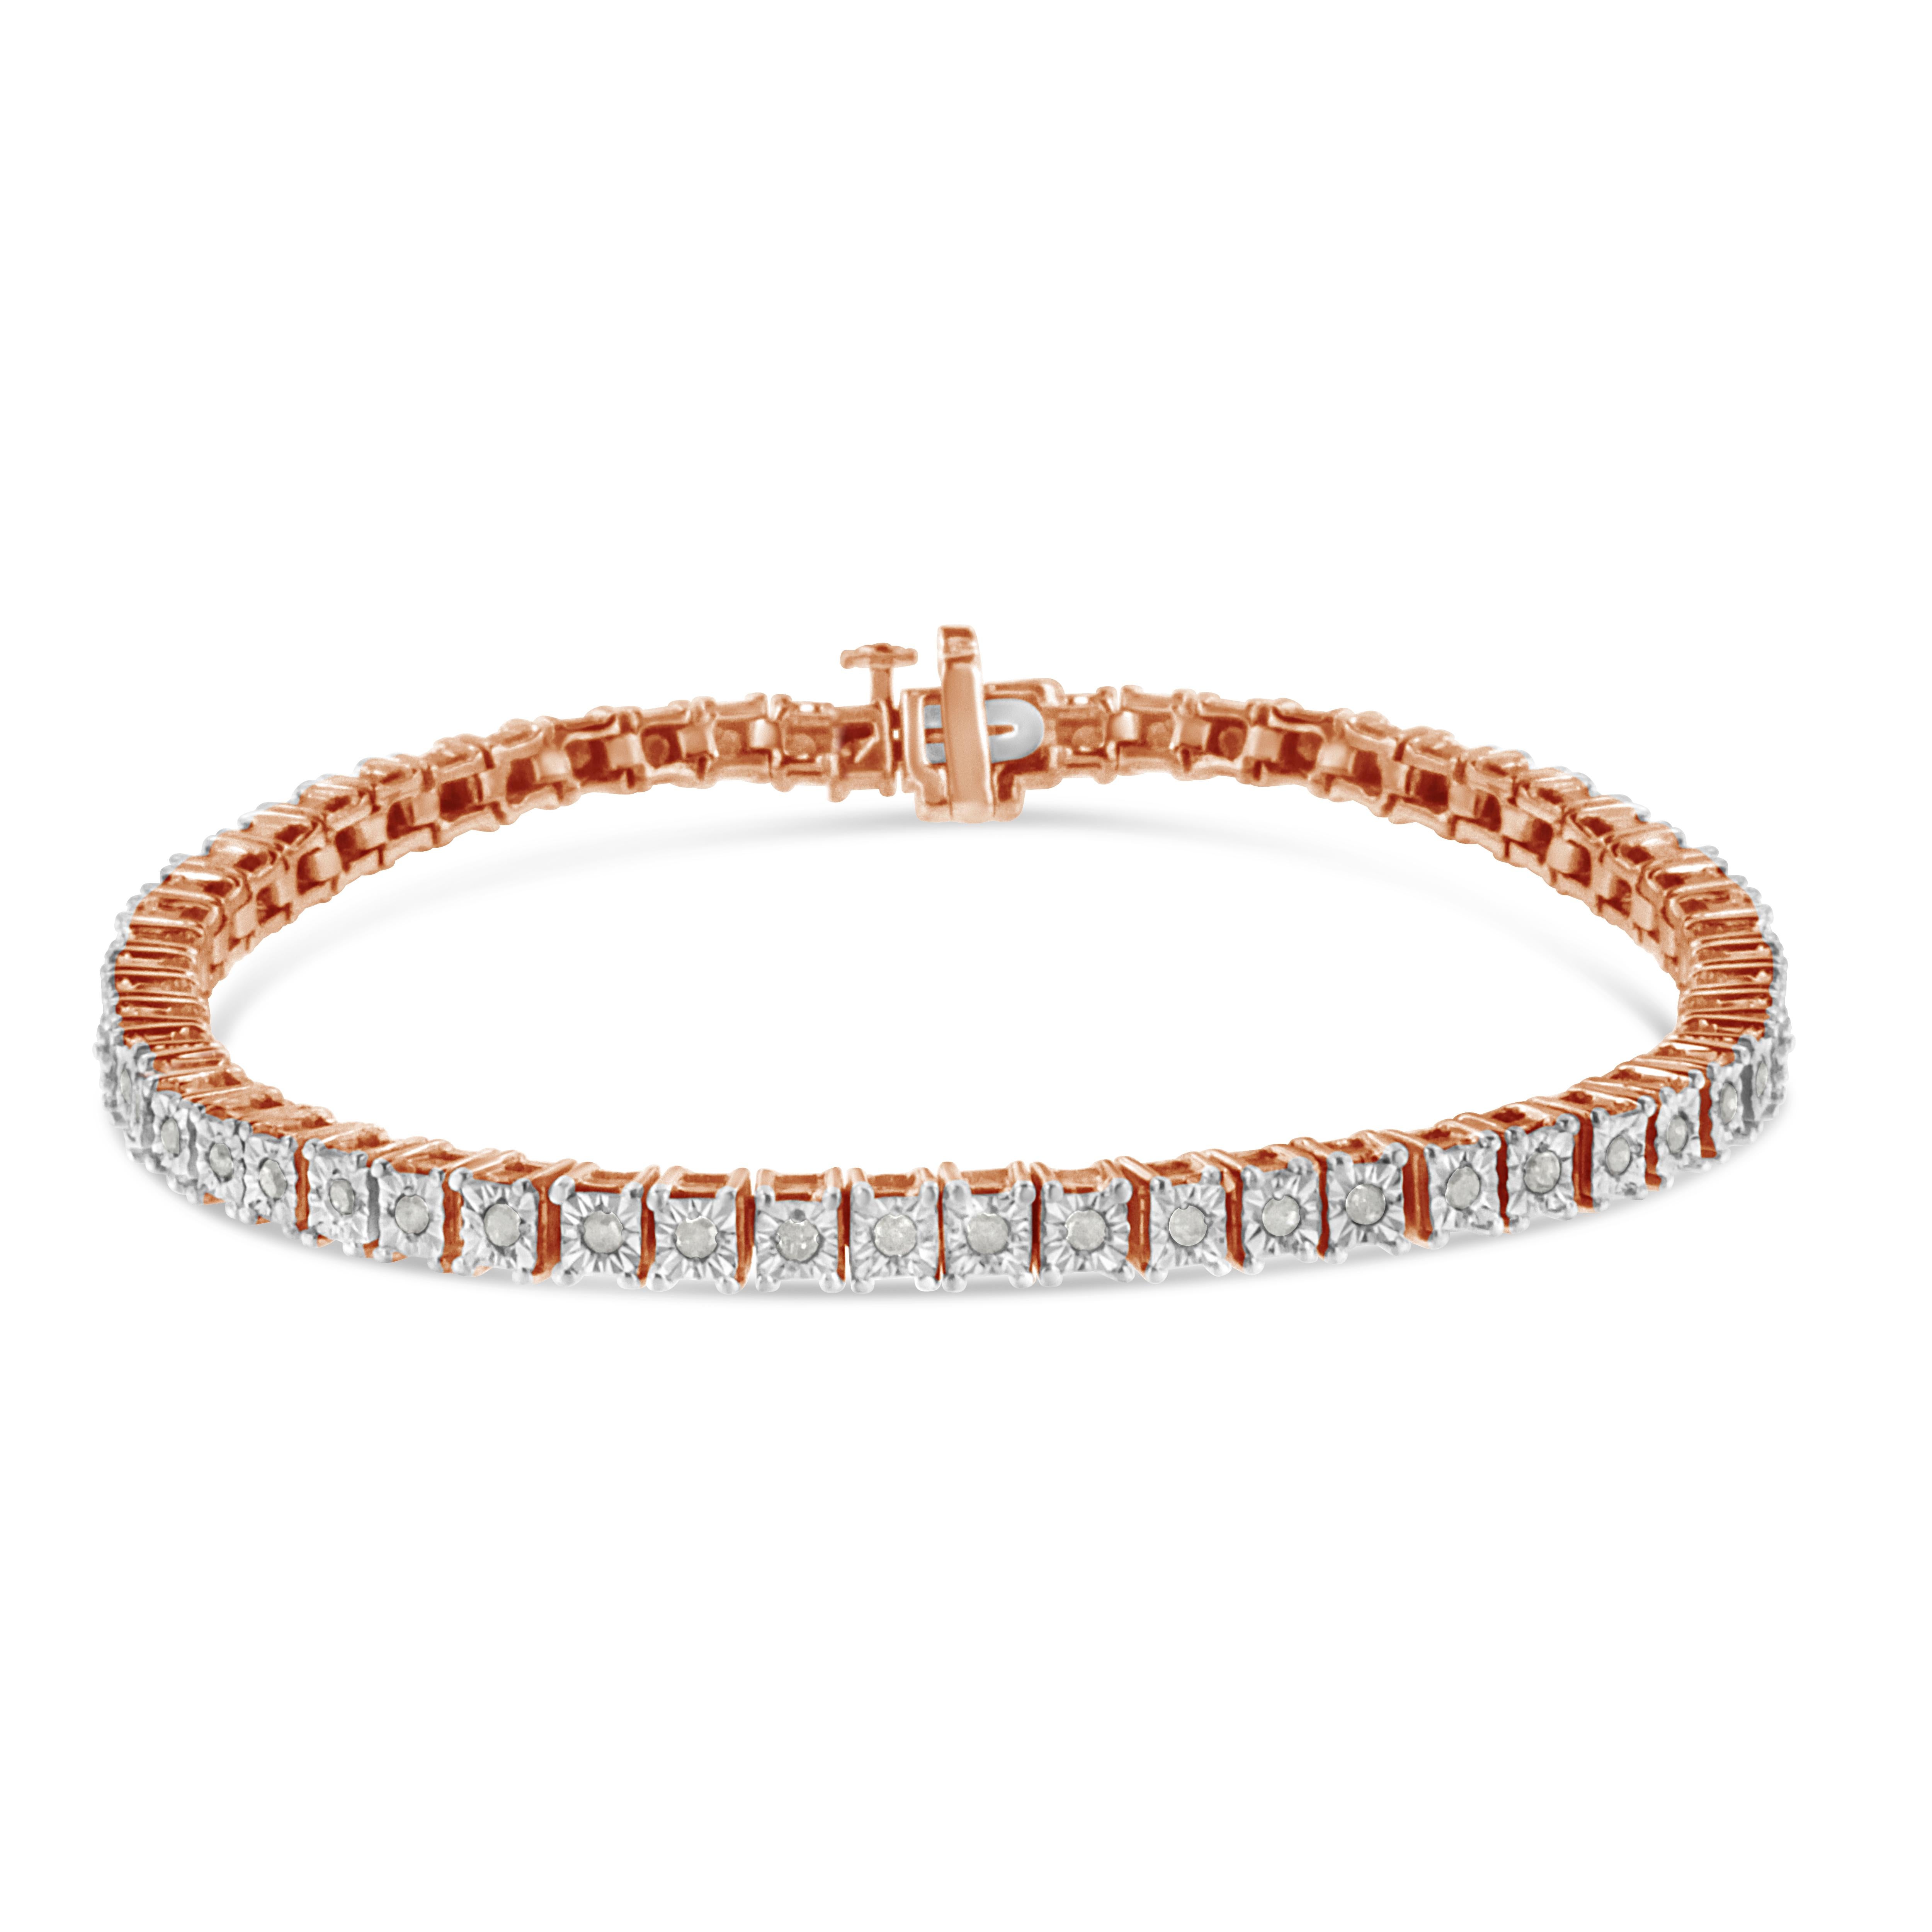 This feminine and glamorous tennis bracelet is made up of the most lovely, multifaceted rose cut diamonds, reminiscent of vintage-era Art Deco jewelry style. Set in square links of real, solid .925 sterling silver for a timeless look, in your choice